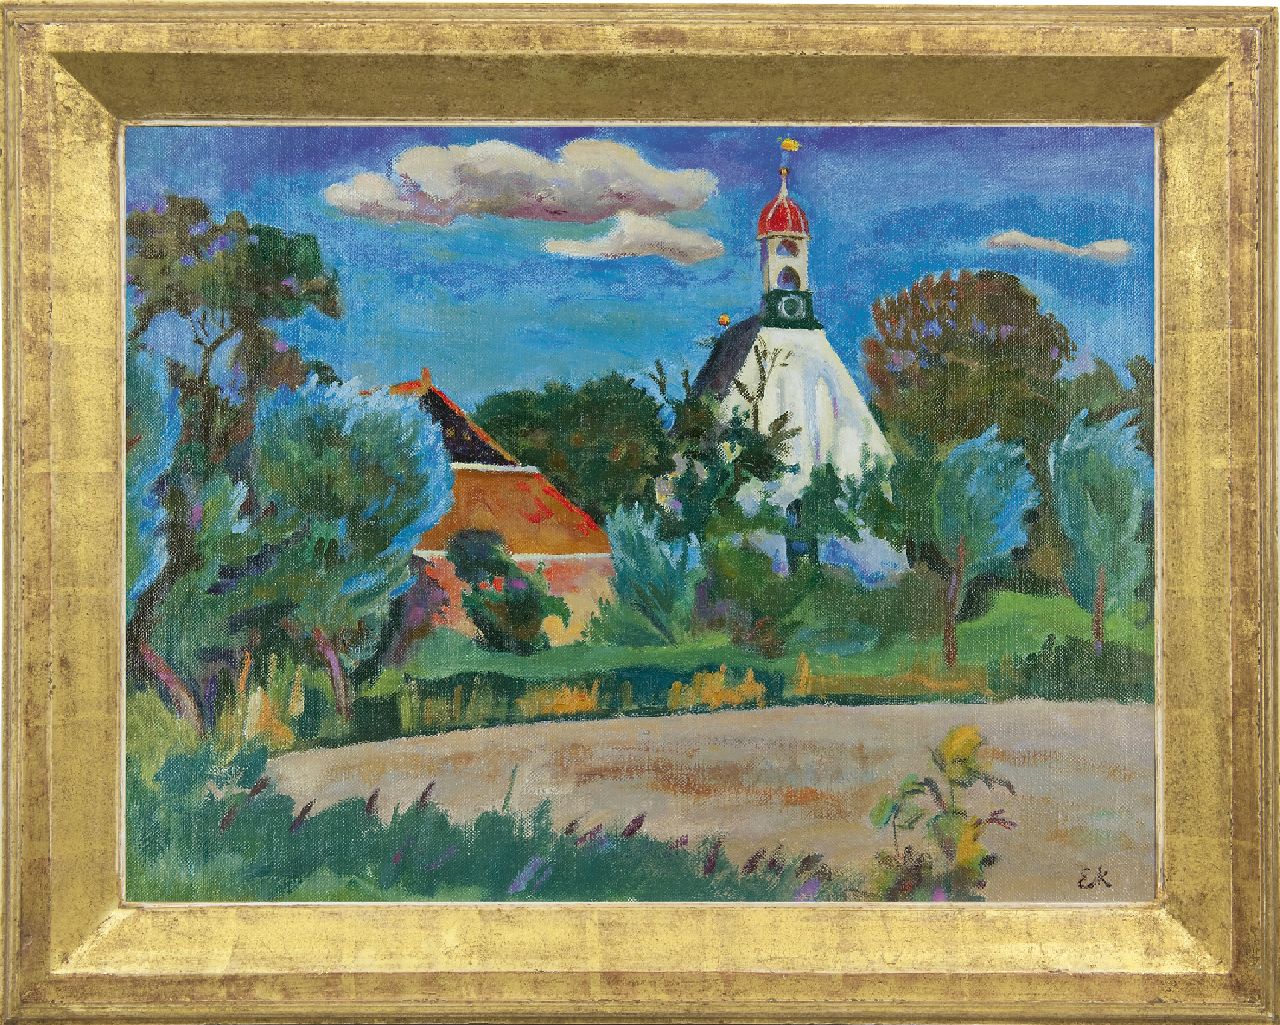 Kleima E.A.  | 'Ekke' Abel Kleima, The church of Breede, oil on canvas 46.3 x 61.1 cm, signed l.r. with initials and painted between 1938-1940